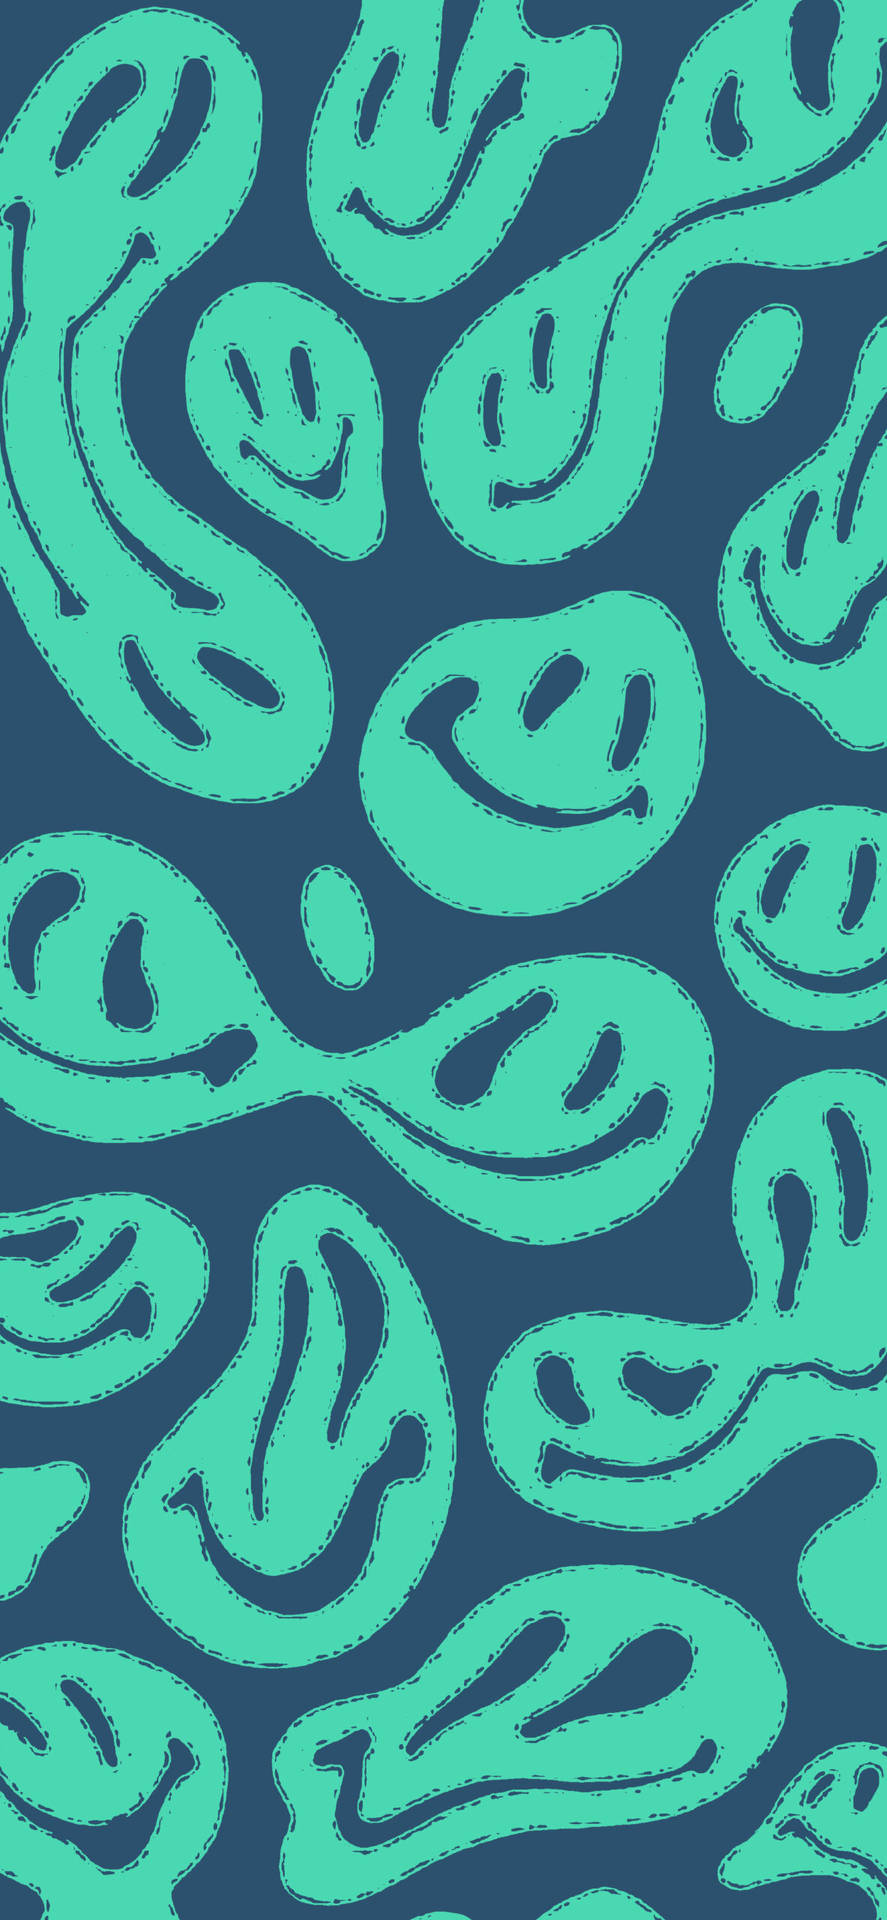 Trippy Aesthetic Blue Distorted Smiley Background